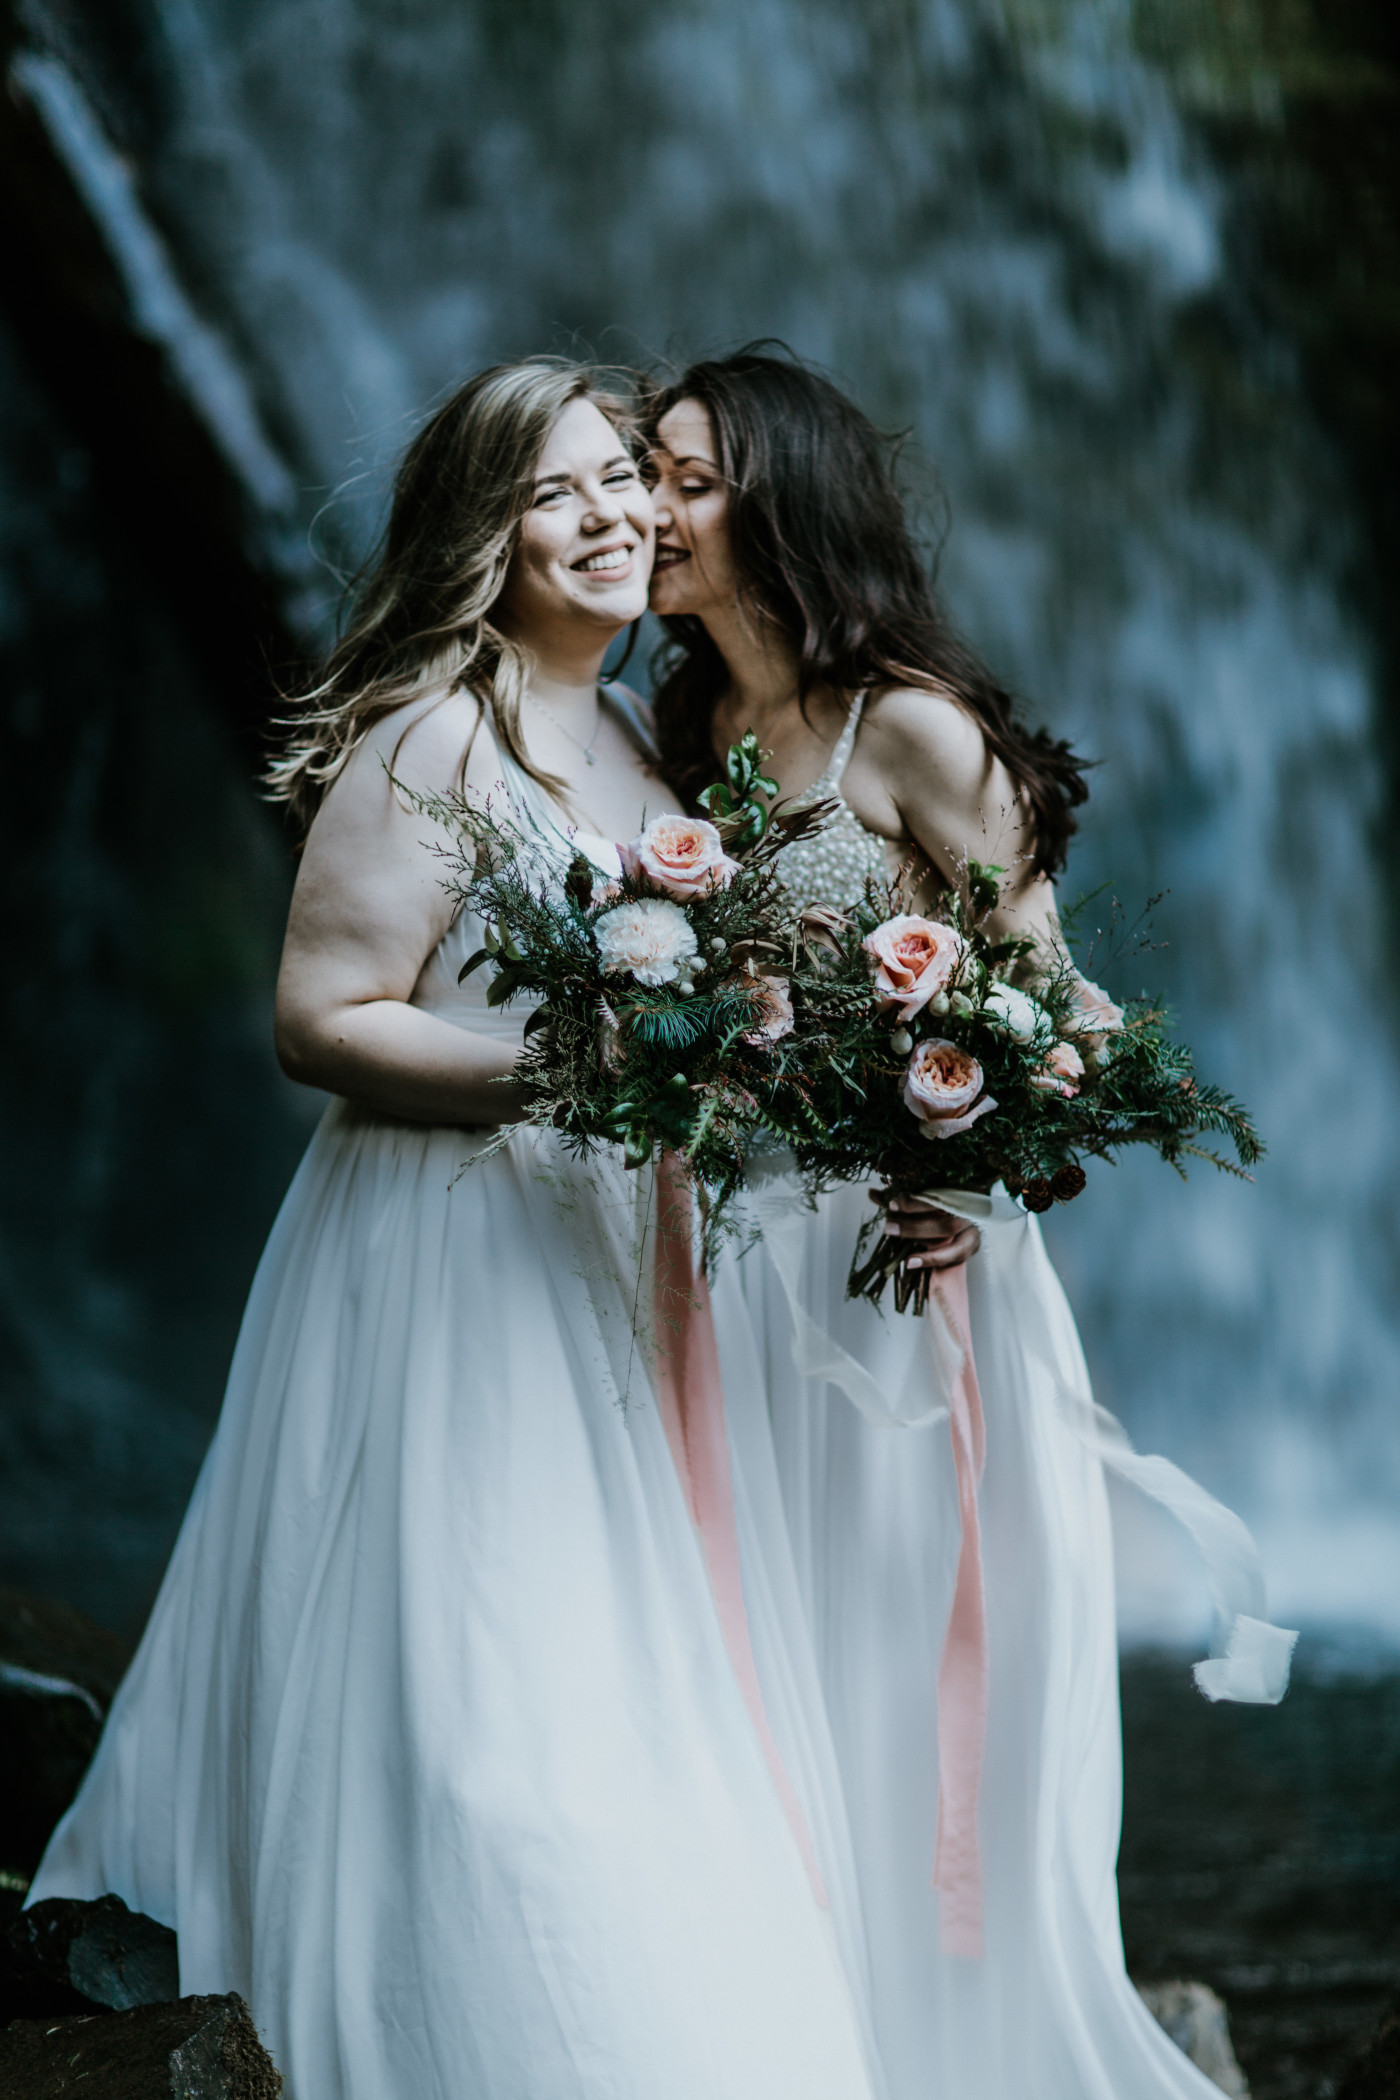 Hayley and Tiffany showing off their flowers. Elopement photography at the Columbia River Gorge by Sienna Plus Josh.